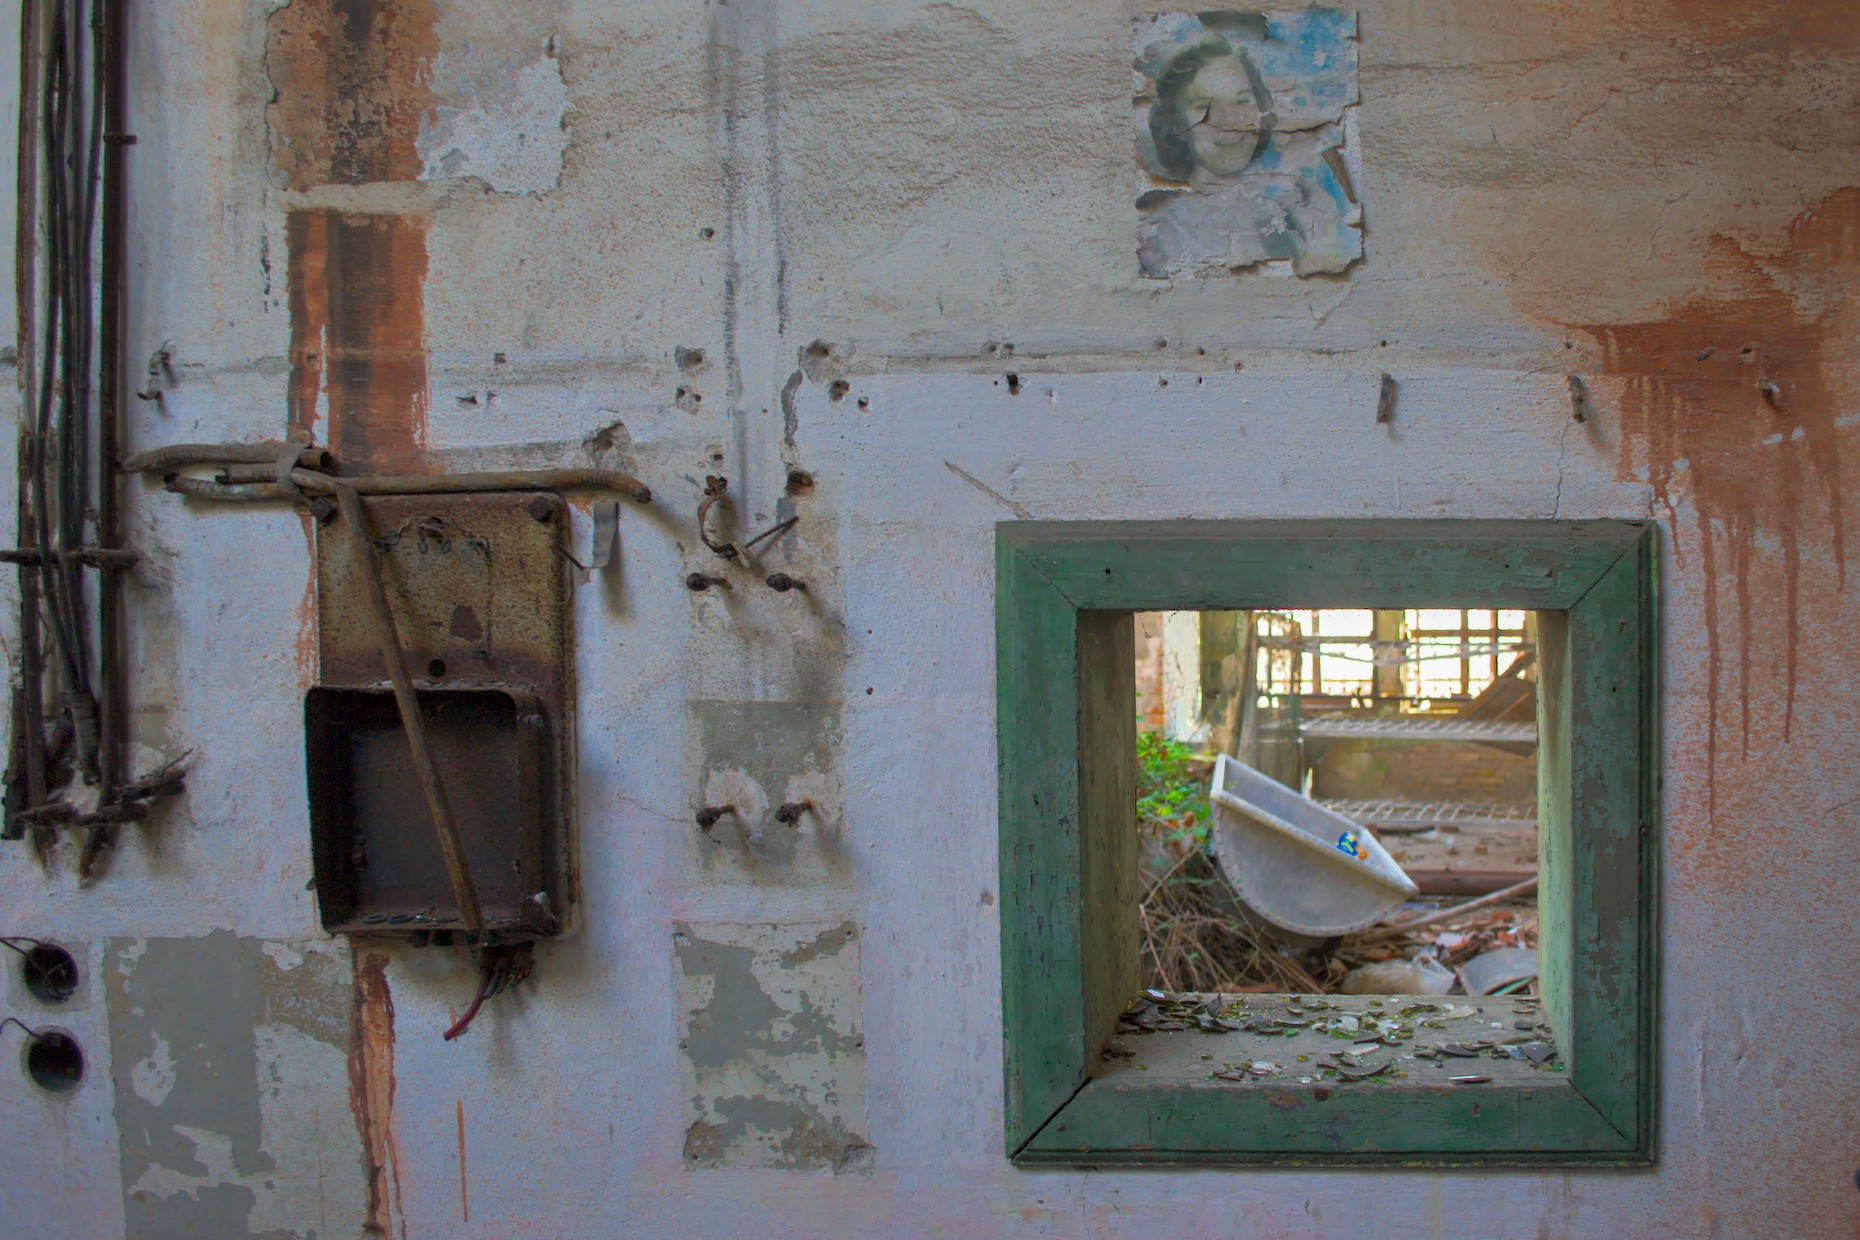 Poveglia - a view of the laundry from the heating central